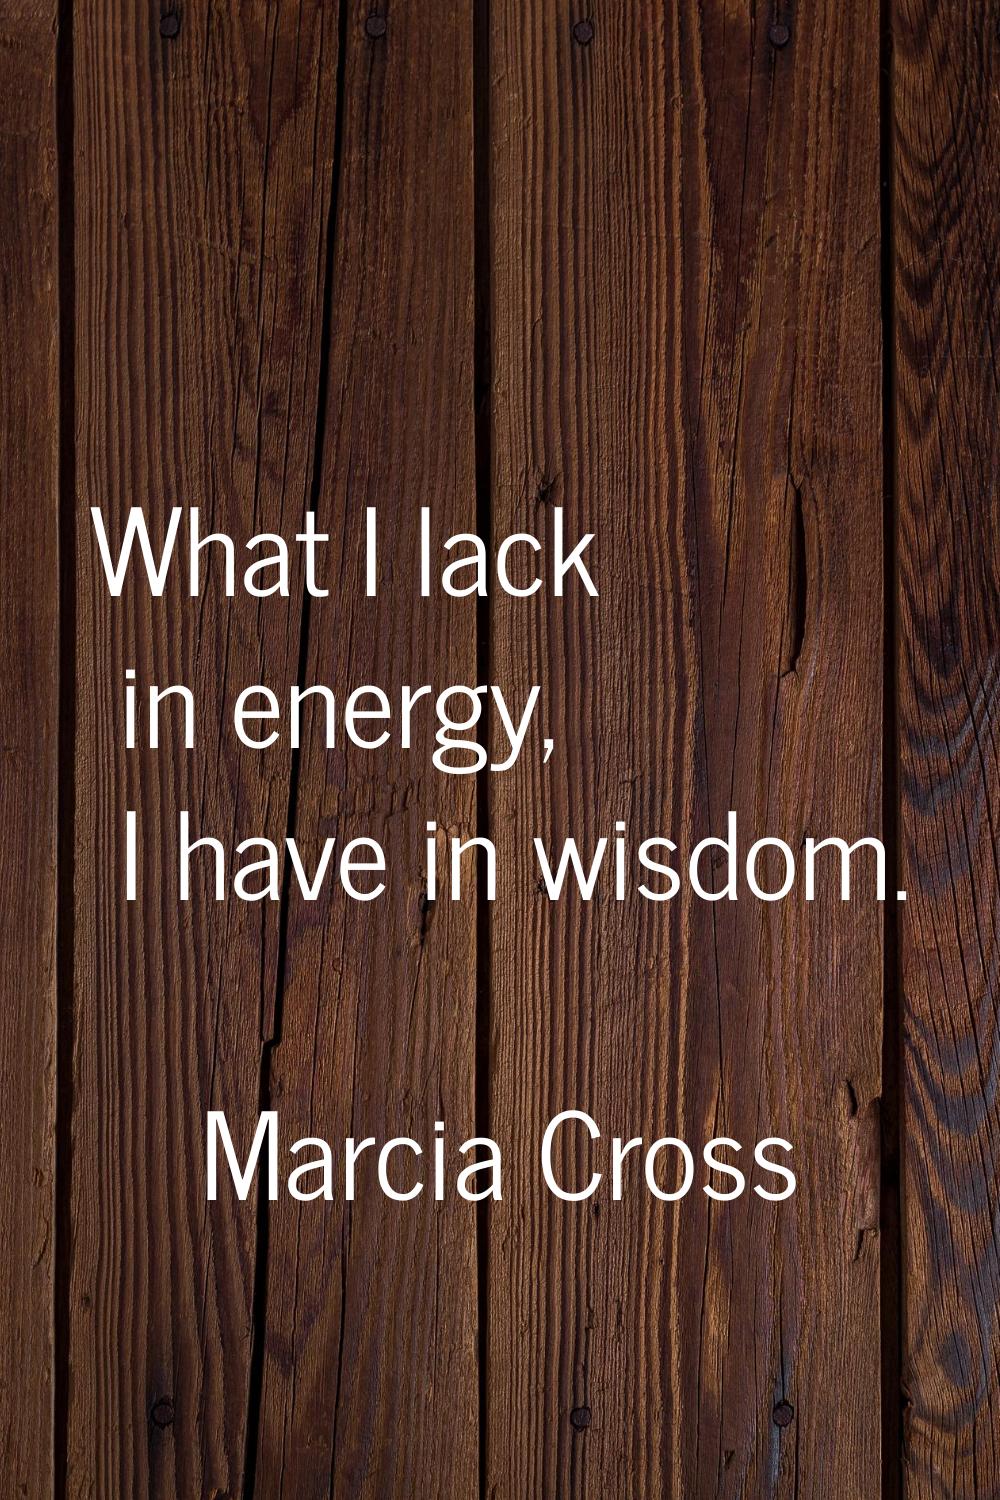 What I lack in energy, I have in wisdom.